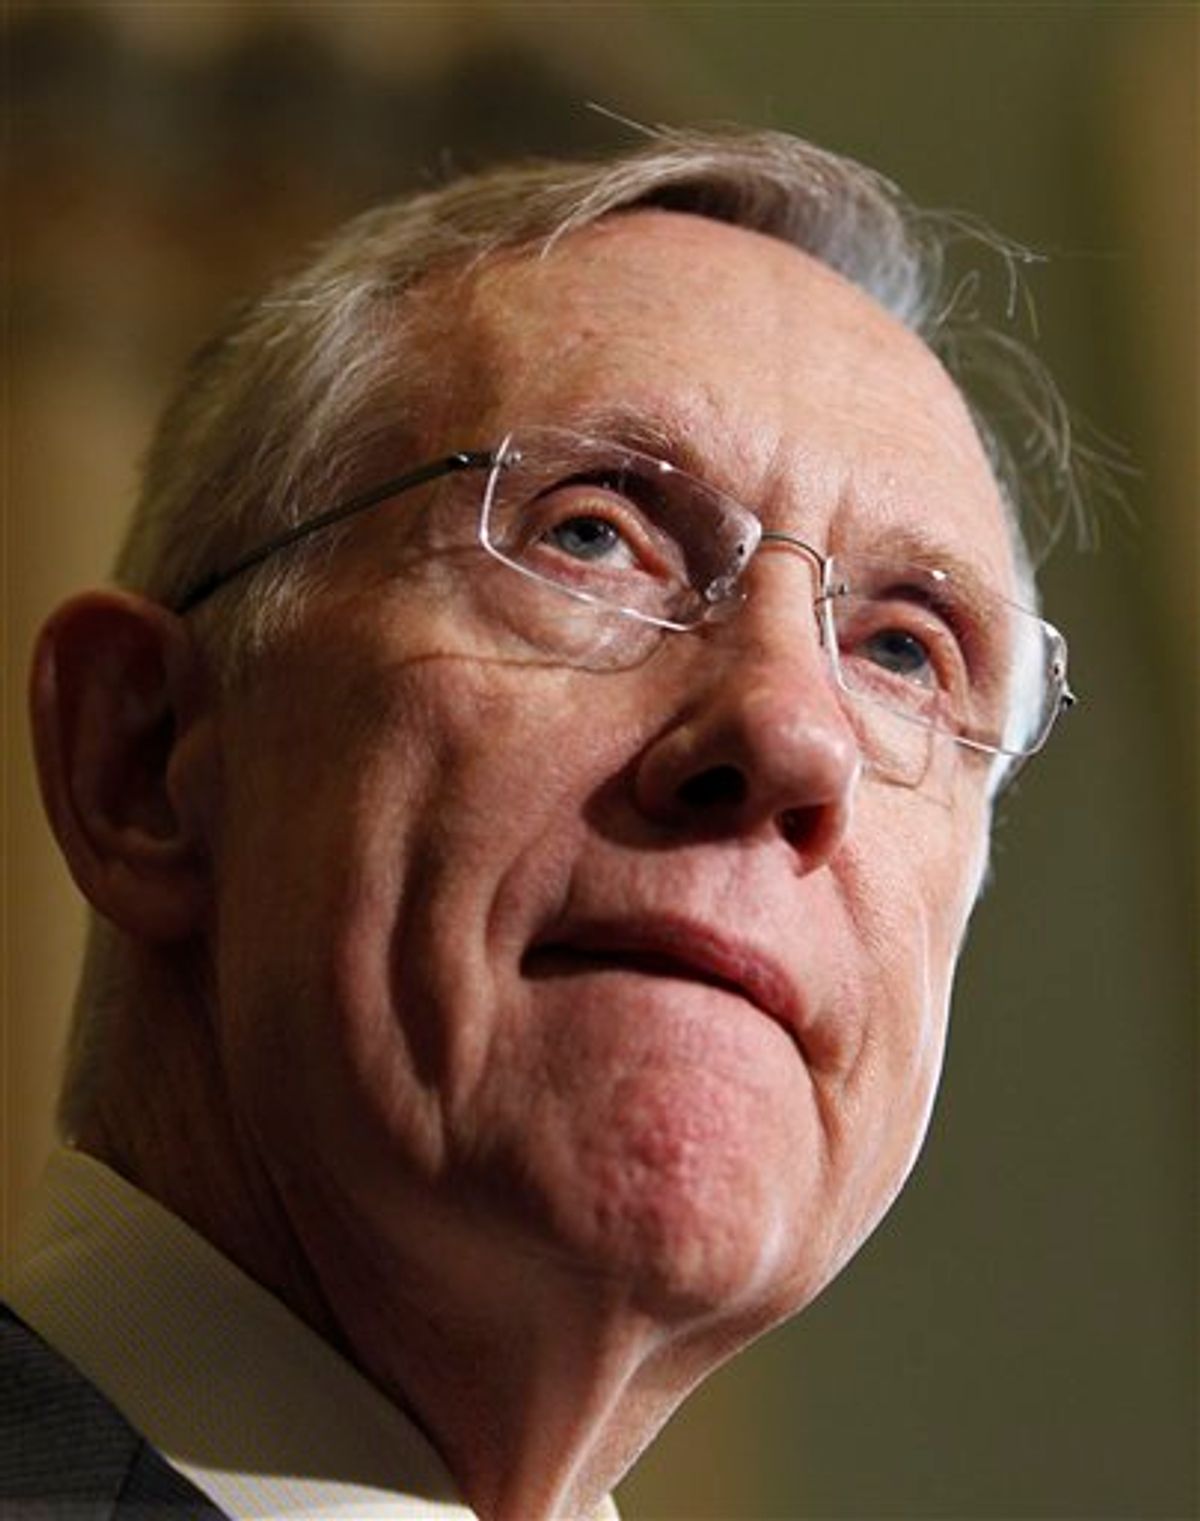 Senate Majority Leader Harry Reid of Nev. pauses while speaking to the media on Capitol Hill in Washington, Tuesday, July 13, 2010. (AP Photo/Alex Brandon) (AP)